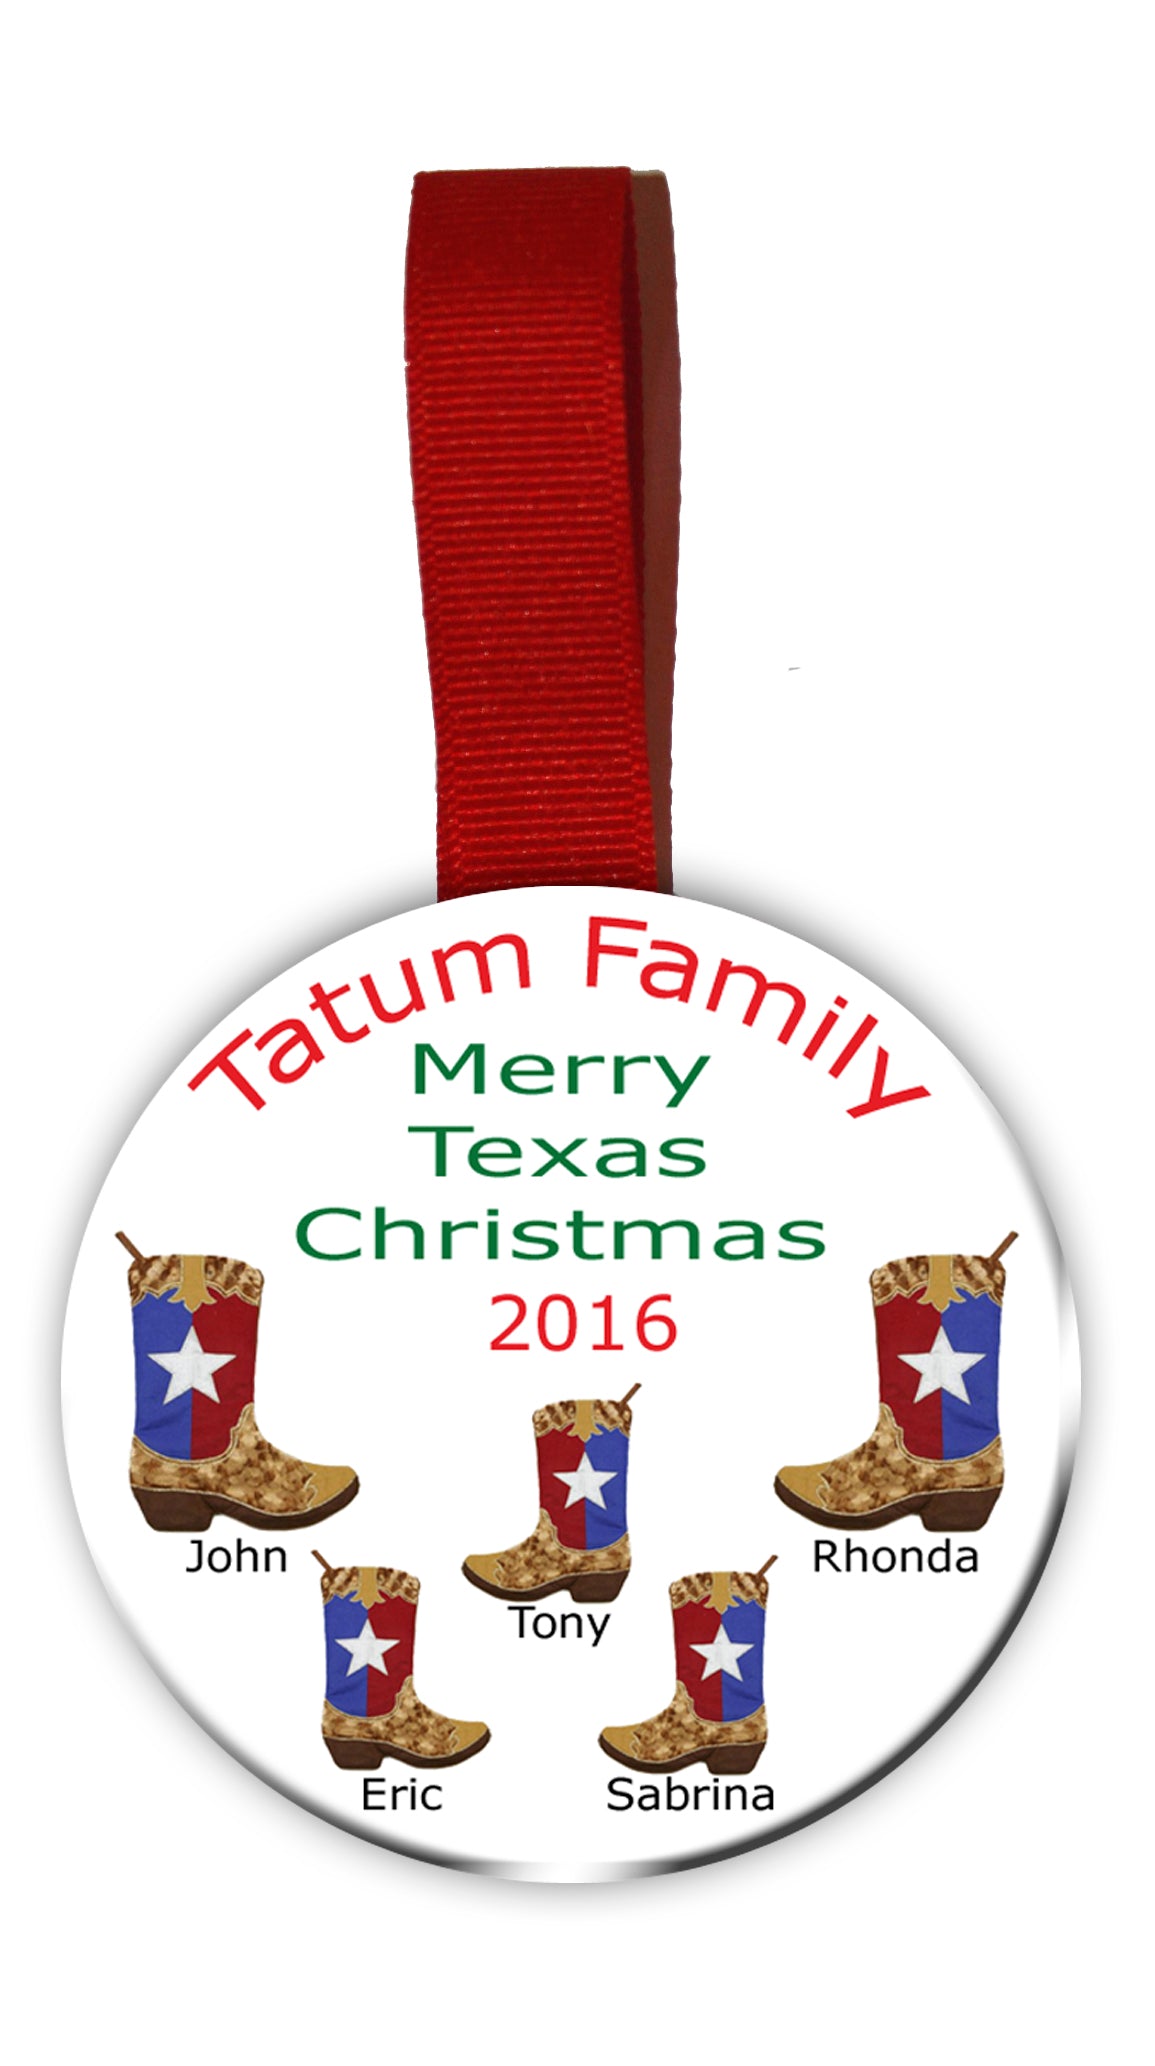 Christmas Tree Ornament Featuring the Family Name and Each Member Name Under Boots